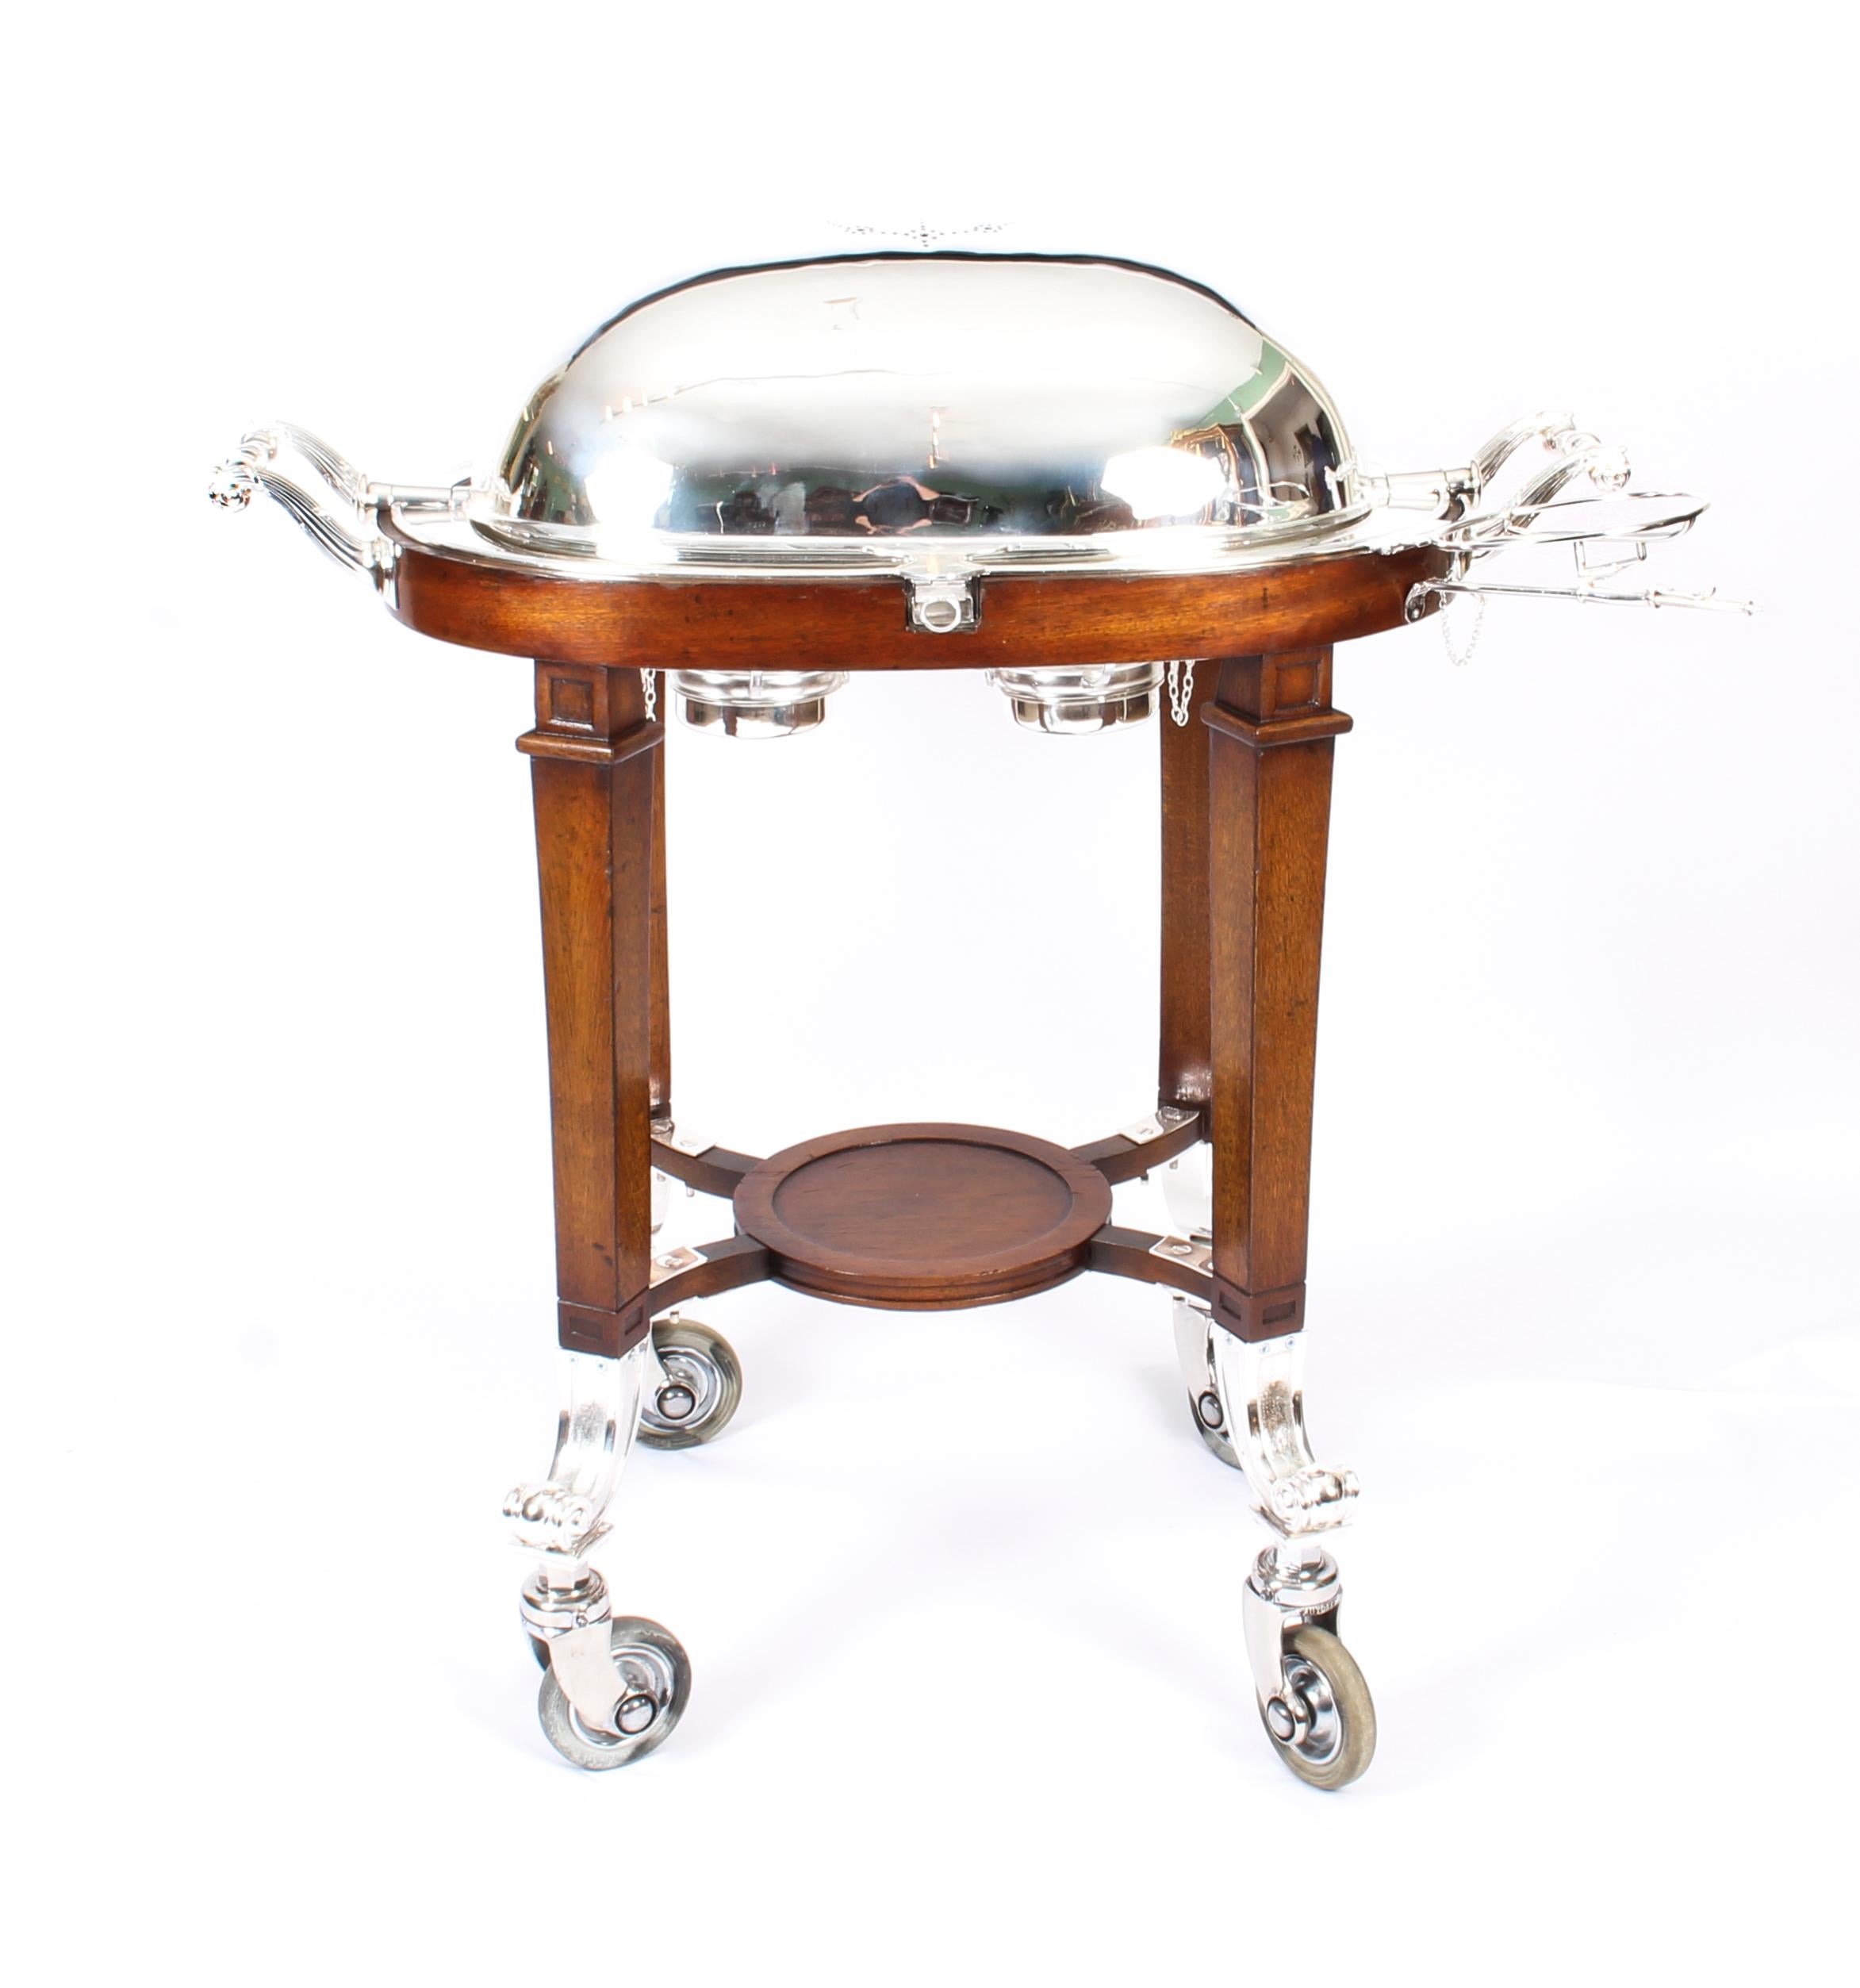 A magnificent and rare fully restored antique Art Deco silver plate and mahogany beef trolley serving cart, circa 1930 in date.

This stunning trolley is suitable for serving cooked meats such as roast beef, lamb, and turkey.
 
It features a